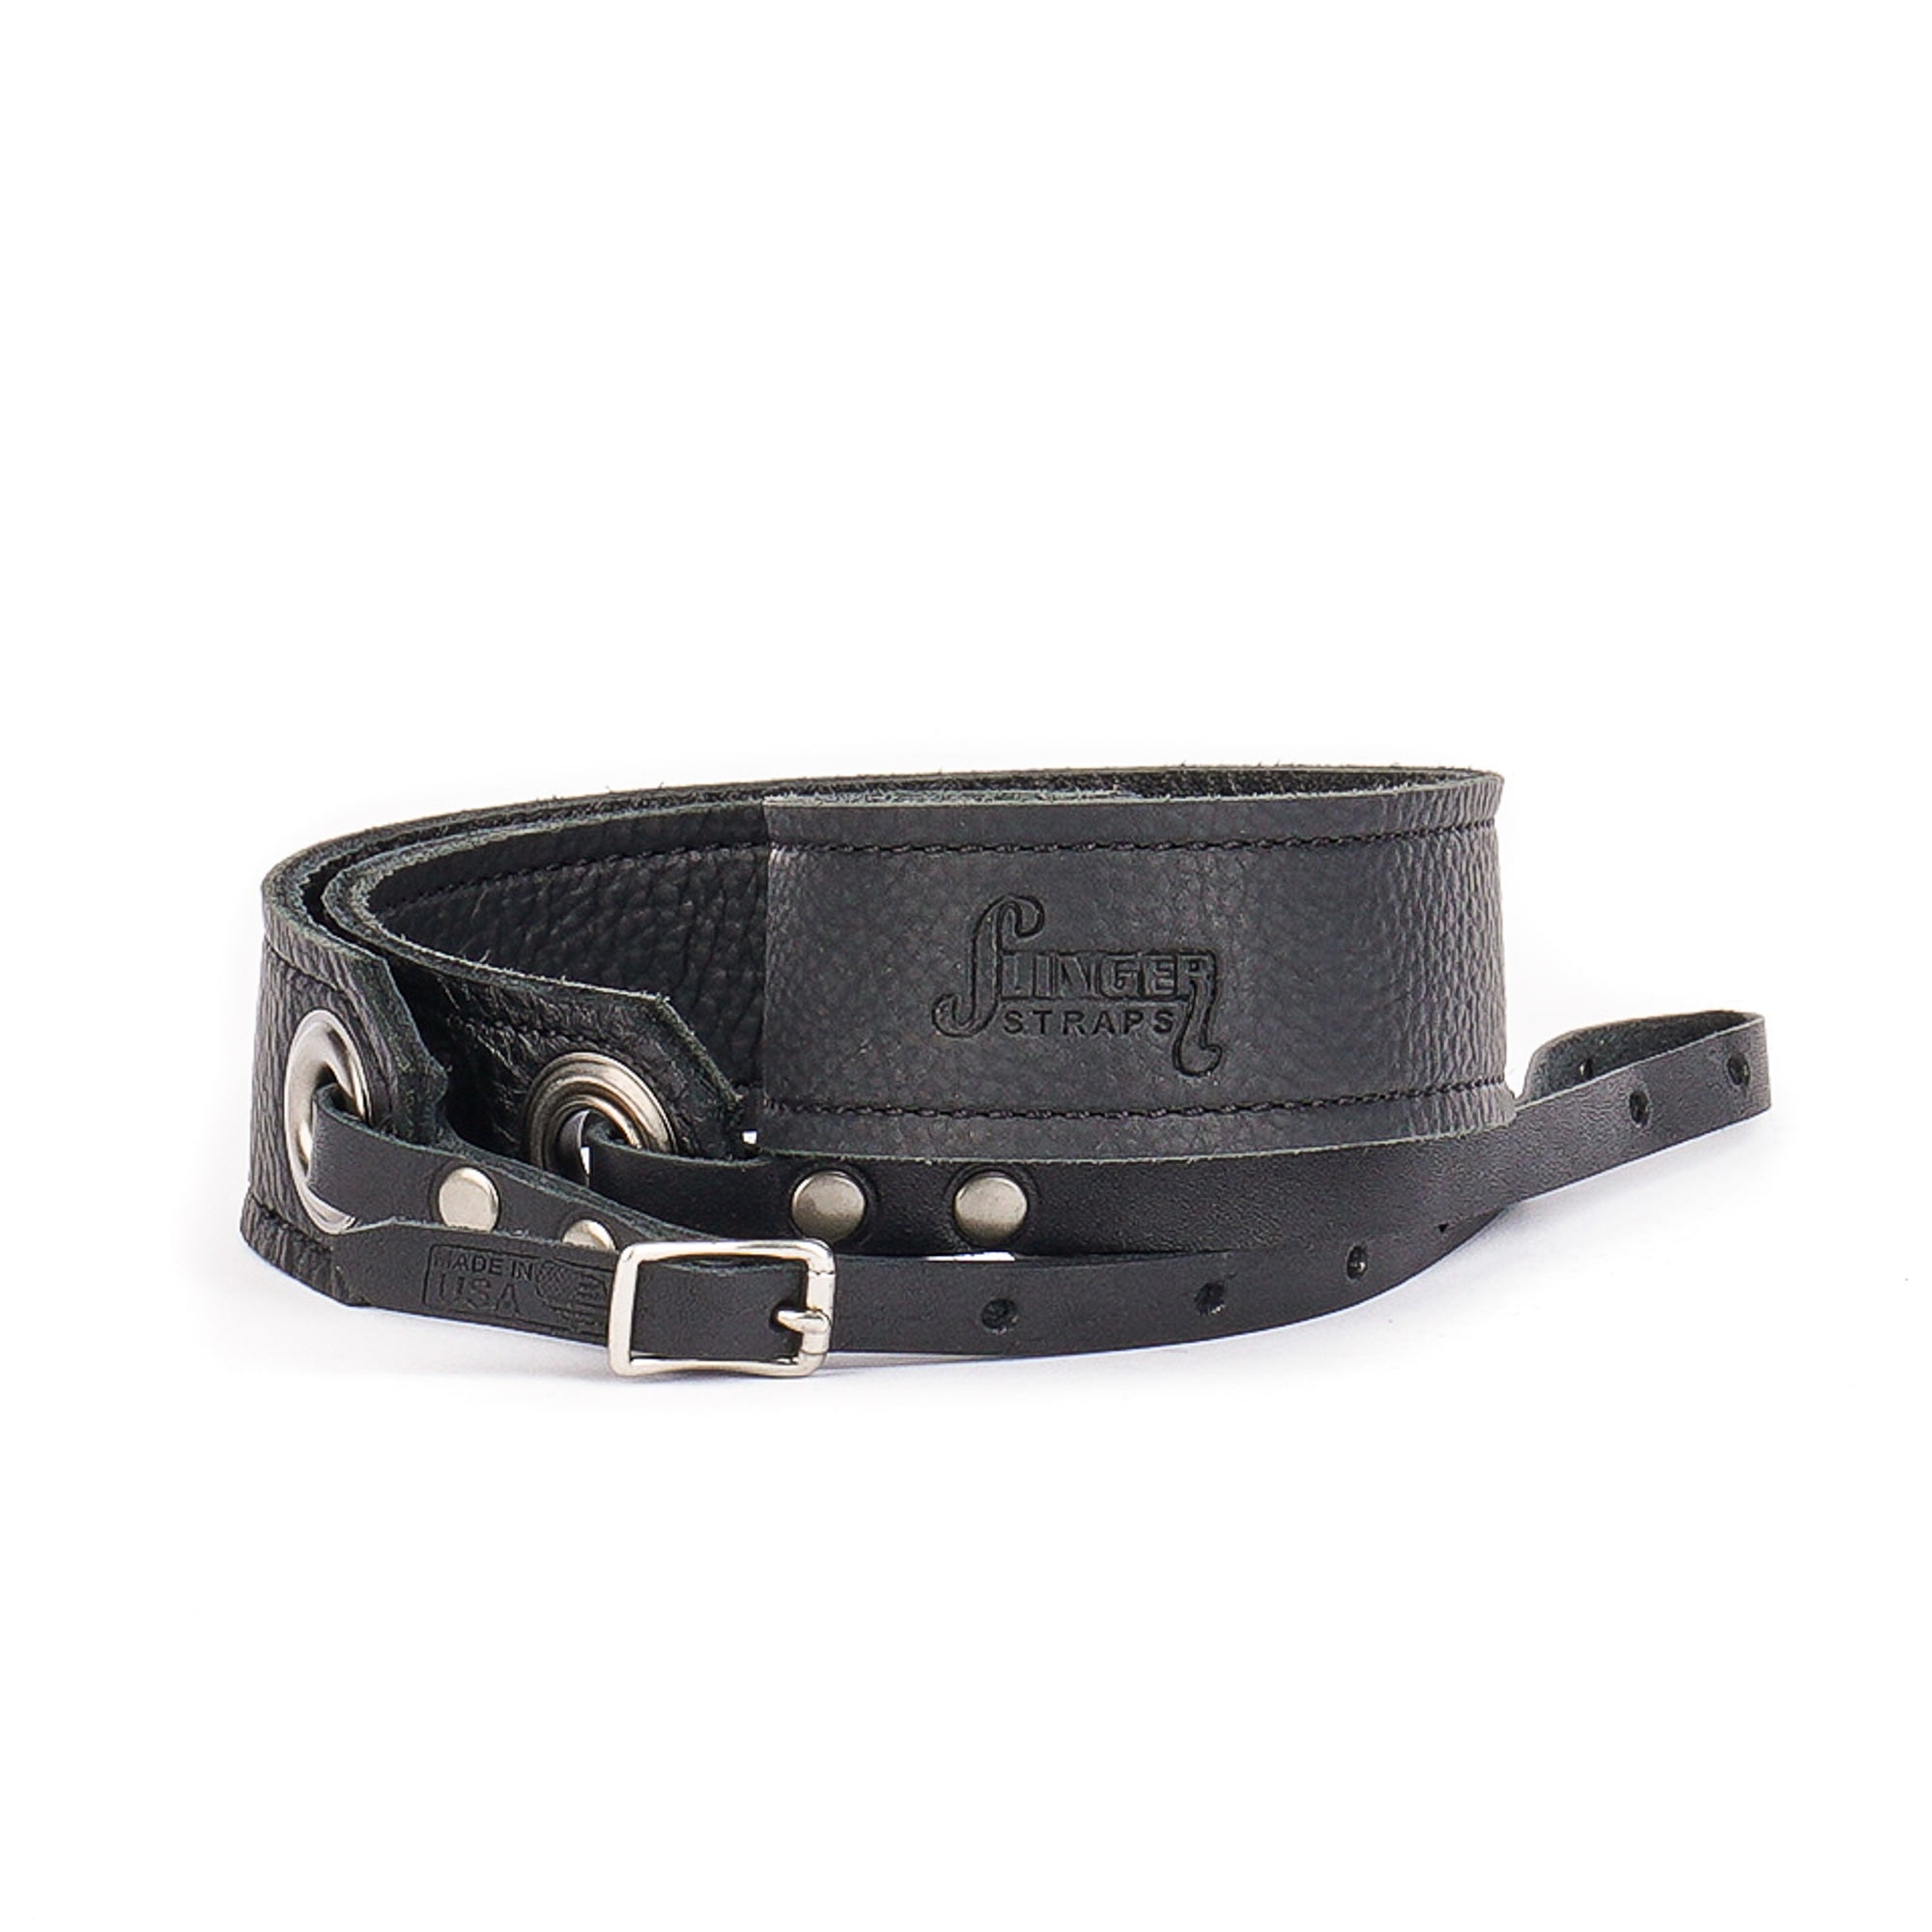 black leather camera strap with brushed nickel grommets rolled on side